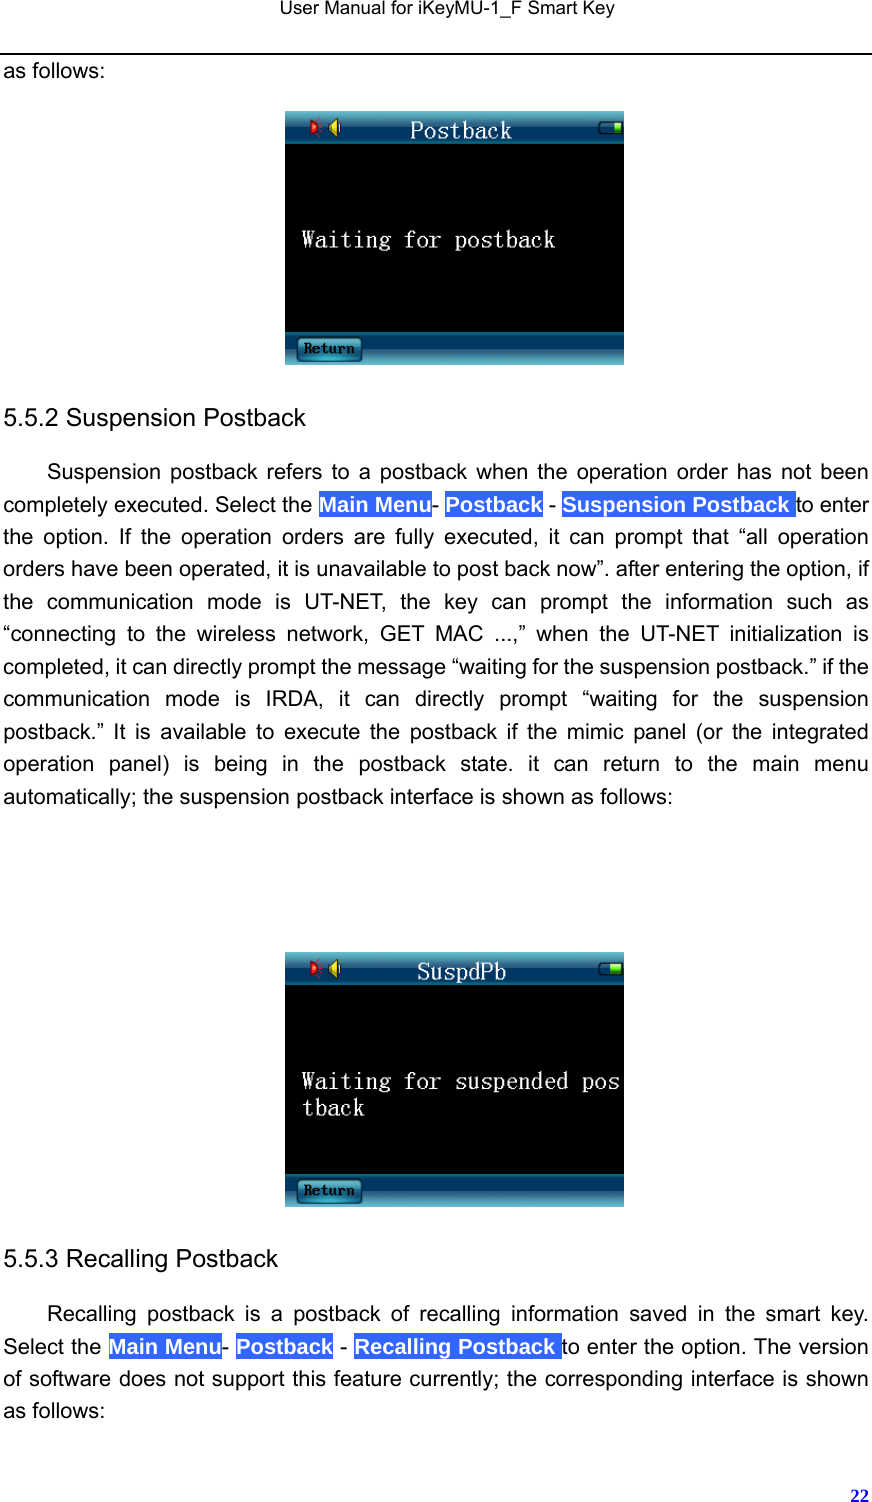   User Manual for iKeyMU-1_F Smart Key       22as follows:   5.5.2 Suspension Postback Suspension postback refers to a postback when the operation order has not been completely executed. Select the Main Menu- Postback - Suspension Postback to enter the option. If the operation orders are fully executed, it can prompt that “all operation orders have been operated, it is unavailable to post back now”. after entering the option, if the communication mode is UT-NET, the key can prompt the information such as “connecting to the wireless network, GET MAC ...,” when the UT-NET initialization is completed, it can directly prompt the message “waiting for the suspension postback.” if the communication mode is IRDA, it can directly prompt “waiting for the suspension postback.” It is available to execute the postback if the mimic panel (or the integrated operation panel) is being in the postback state. it can return to the main menu automatically; the suspension postback interface is shown as follows:       5.5.3 Recalling Postback Recalling postback is a postback of recalling information saved in the smart key. Select the Main Menu- Postback - Recalling Postback to enter the option. The version of software does not support this feature currently; the corresponding interface is shown as follows: 